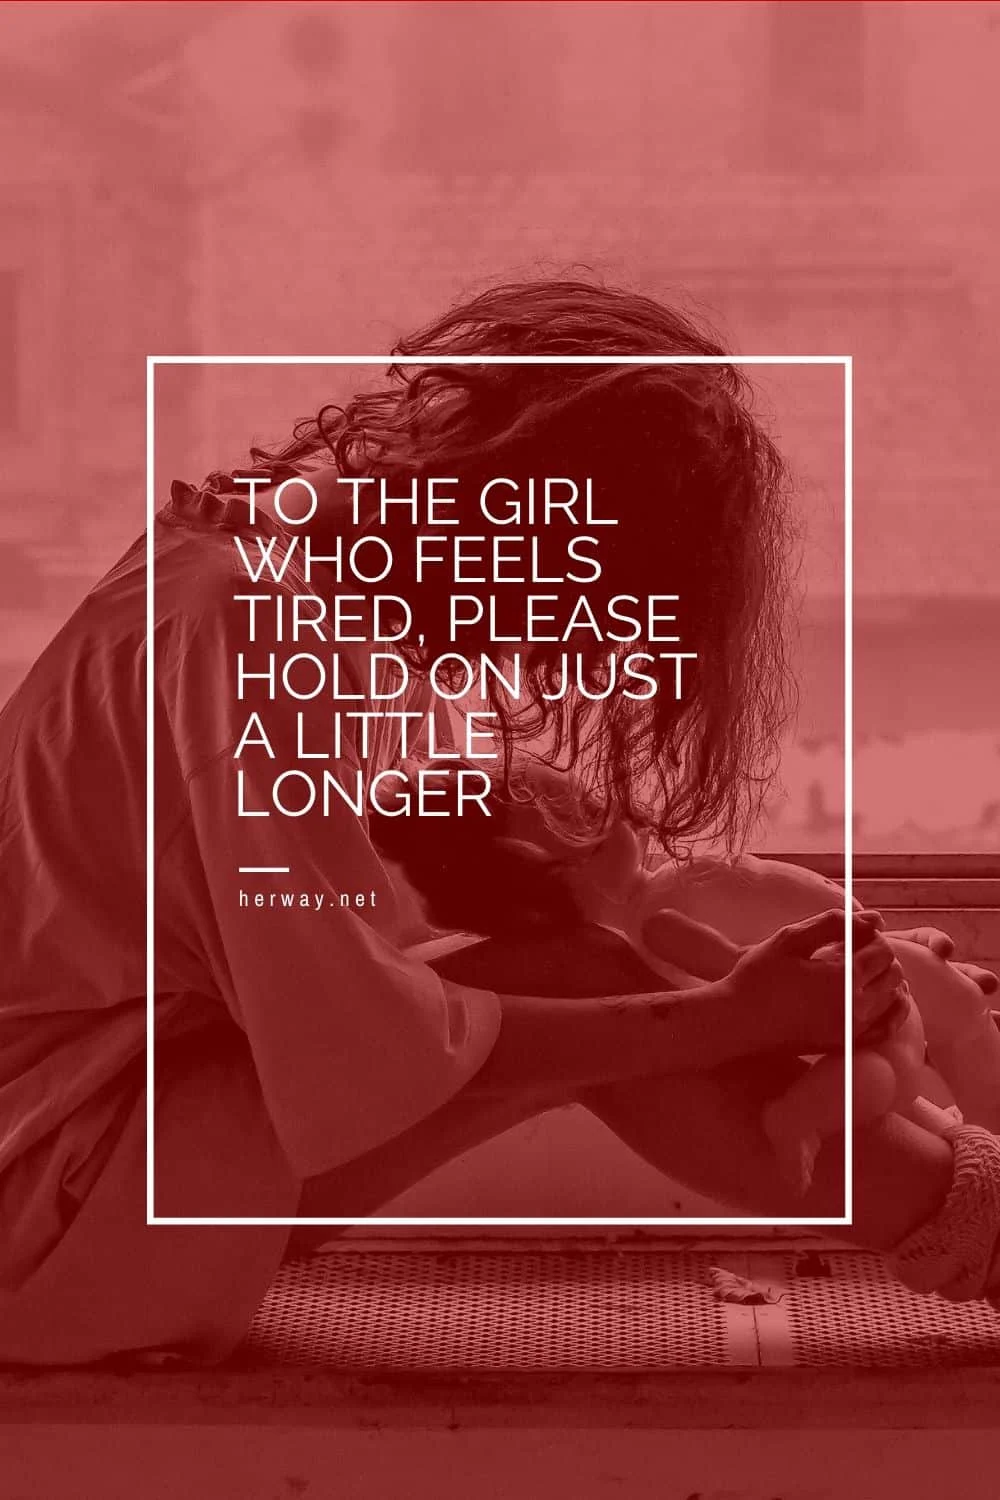 TO THE GIRL WHO FEELS TIRED, PLEASE HOLD ON JUST A LITTLE LONGER